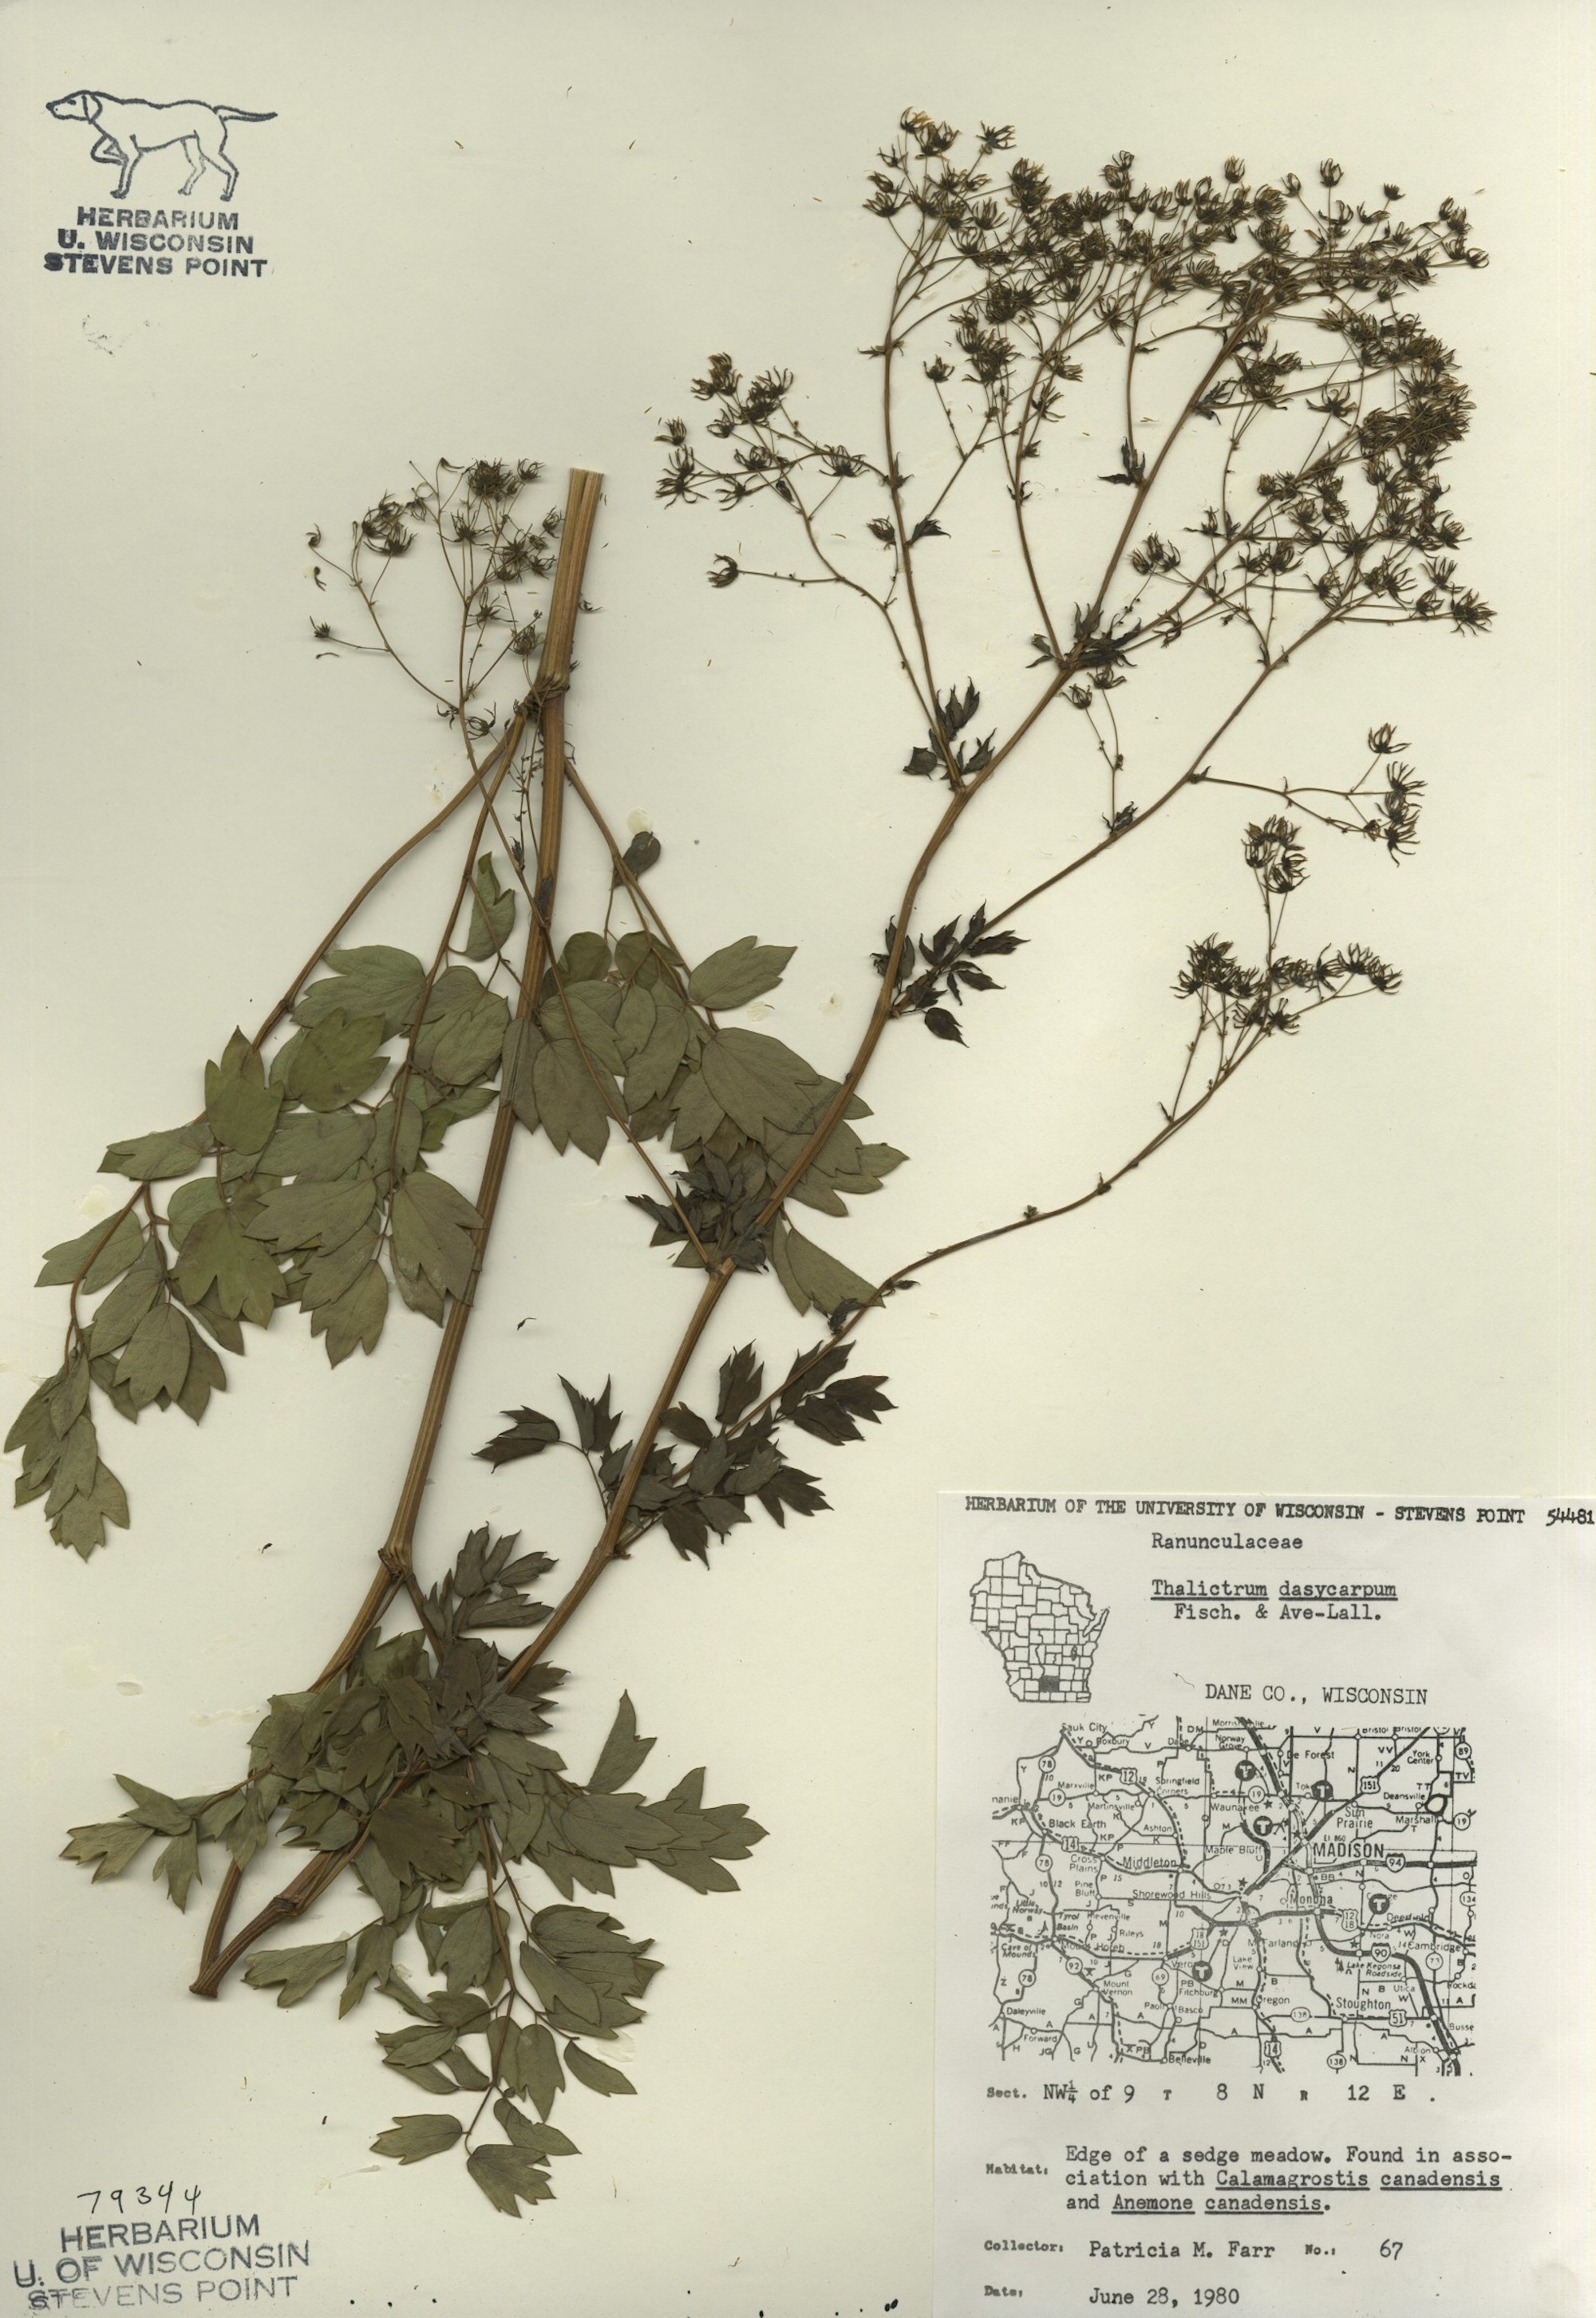 Tall Meadow-rue specimen collected June 28, 1980 in Dane County on edge of a sedge meadow.